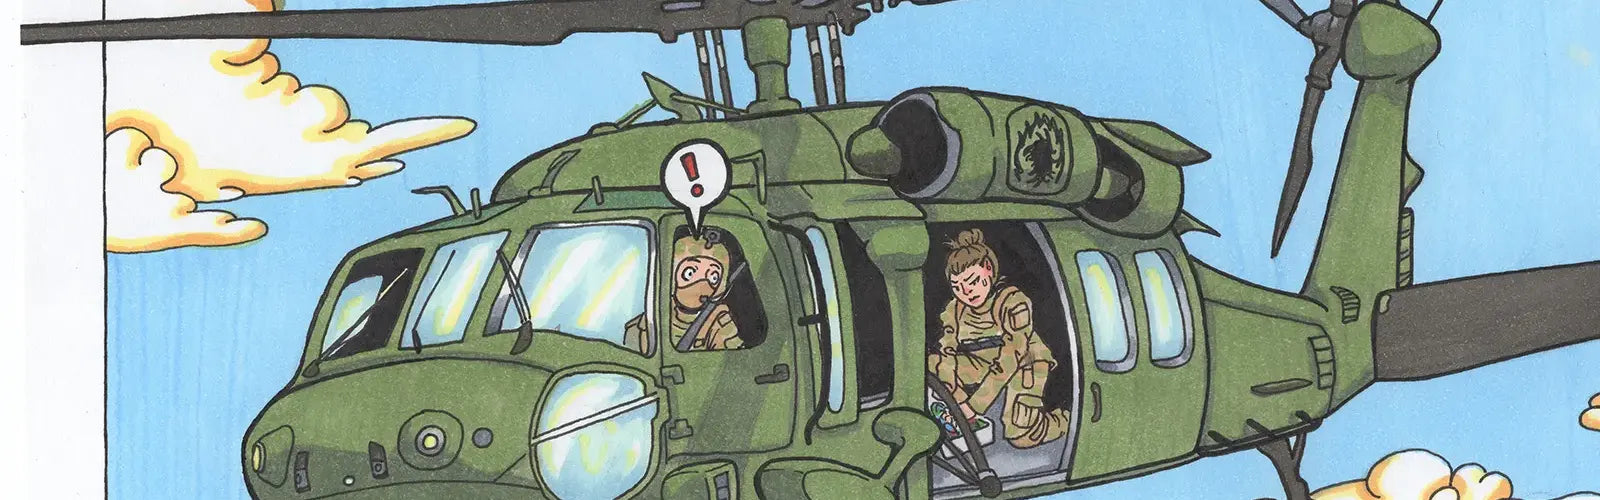 An illustration of a green military helicopter with the side door open